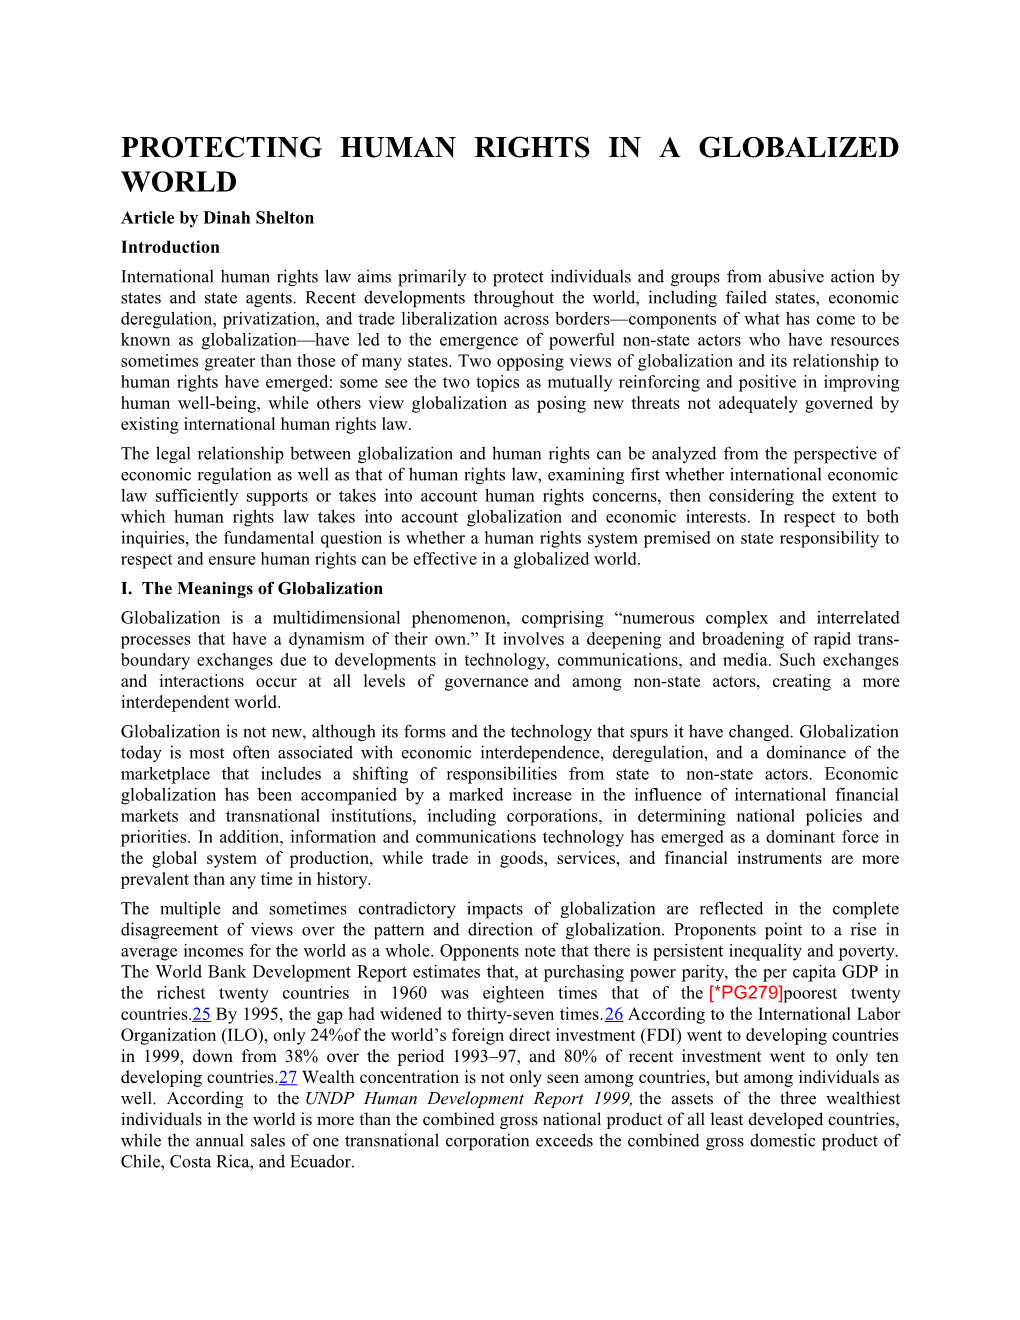 Protecting Human Rights in a Globalized World